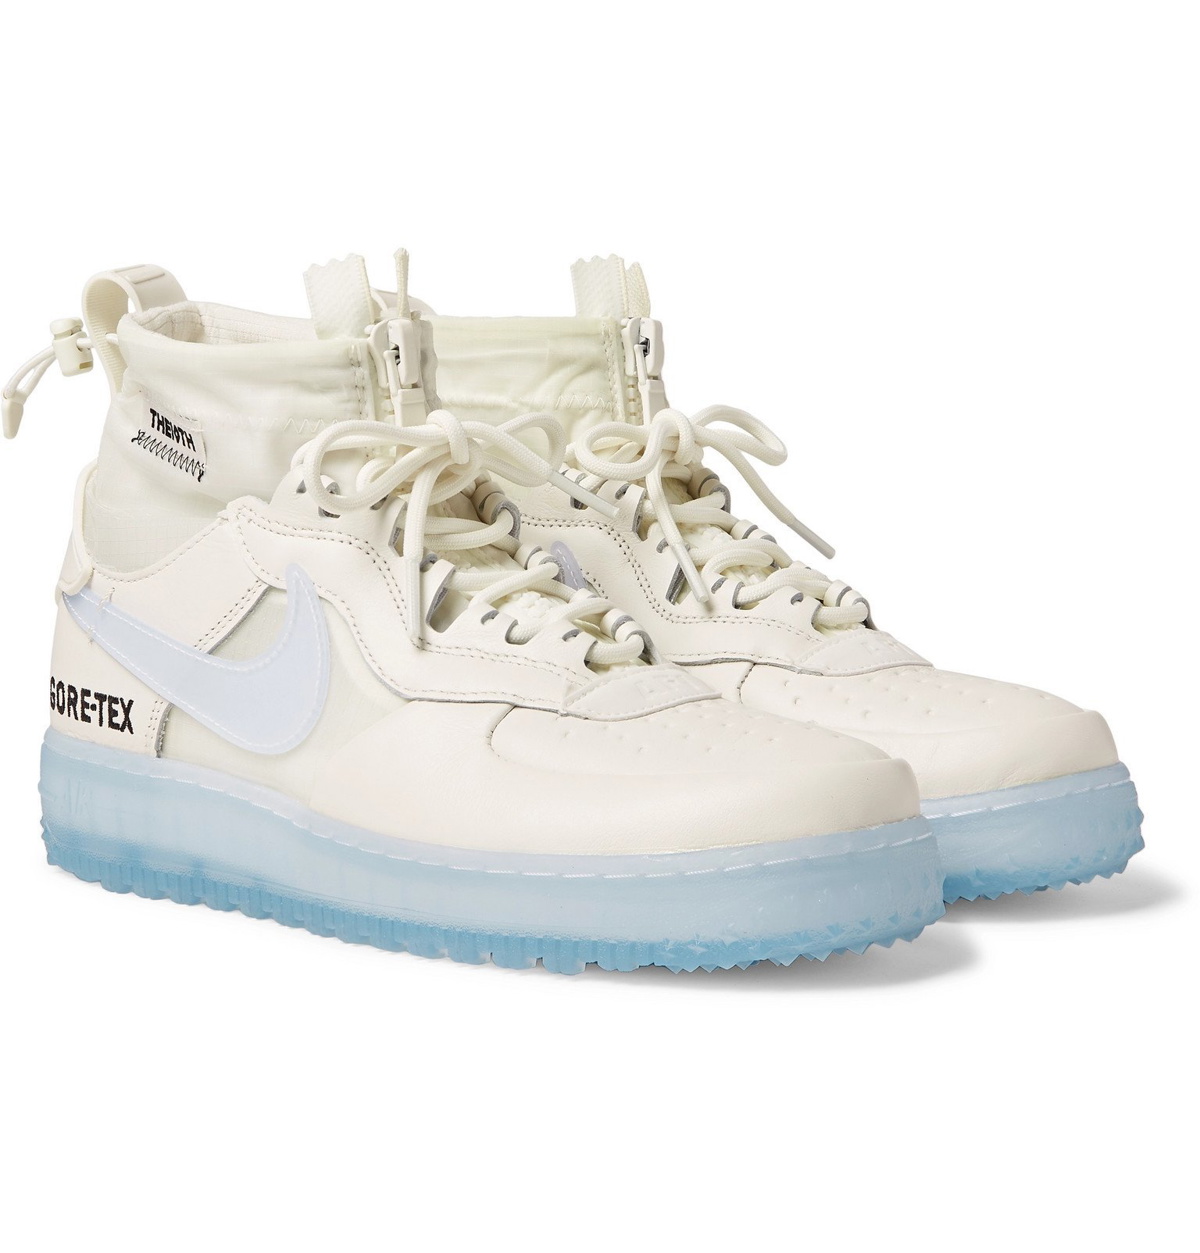 rulle fårehyrde design Nike - Air Force 1 Winter GORE-TEX and Leather High-Top Sneakers - White  Nike